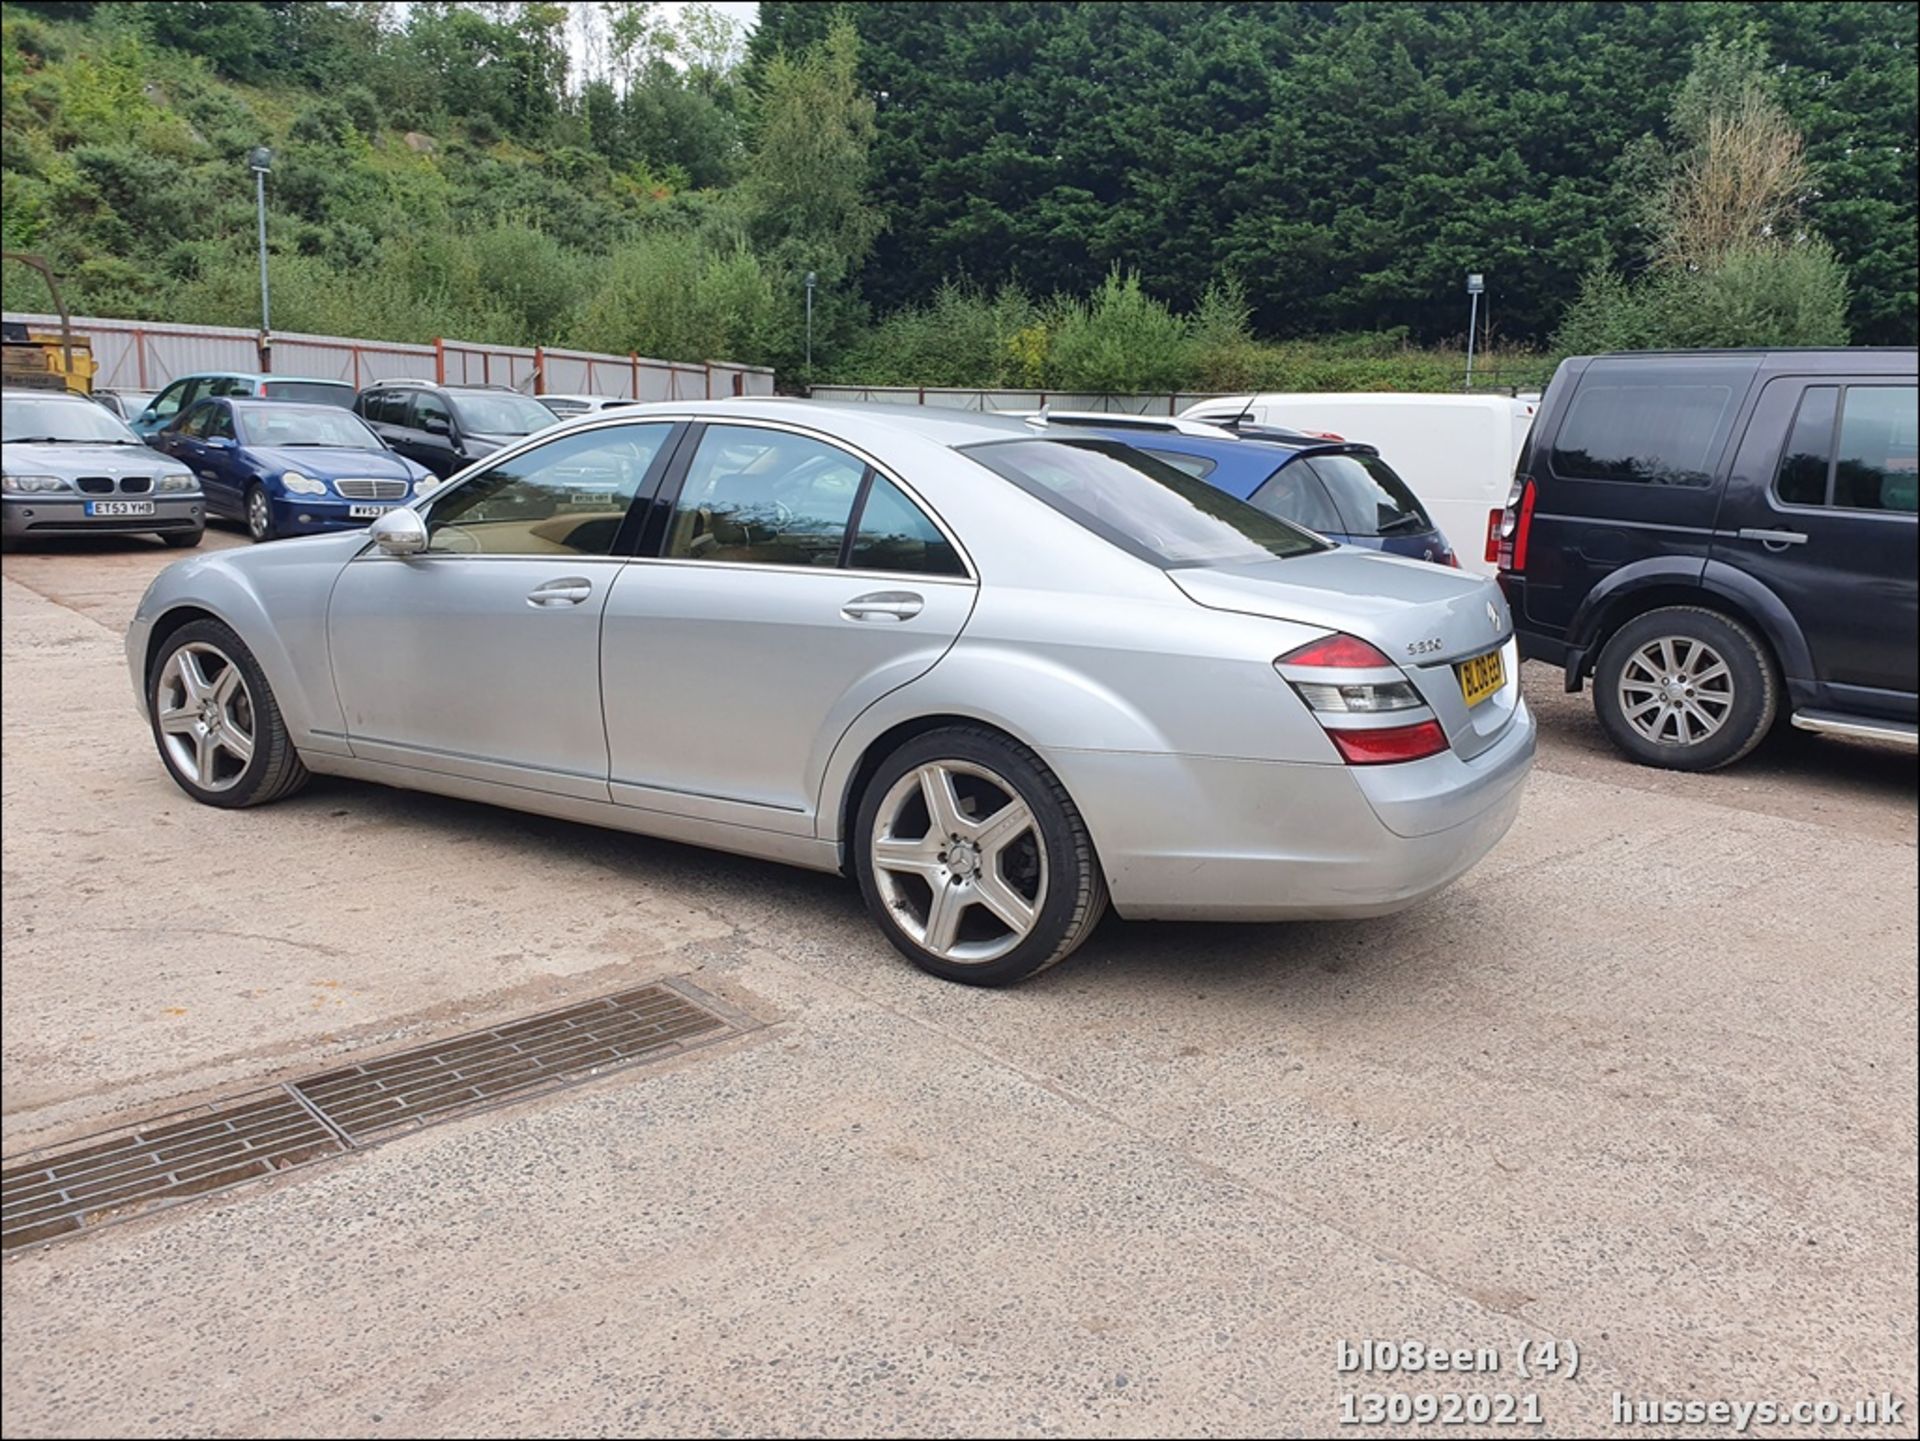 08/08 MERCEDES S320 CDI AUTO - 2987cc 4dr Saloon (Silver, 205k) - Image 4 of 16